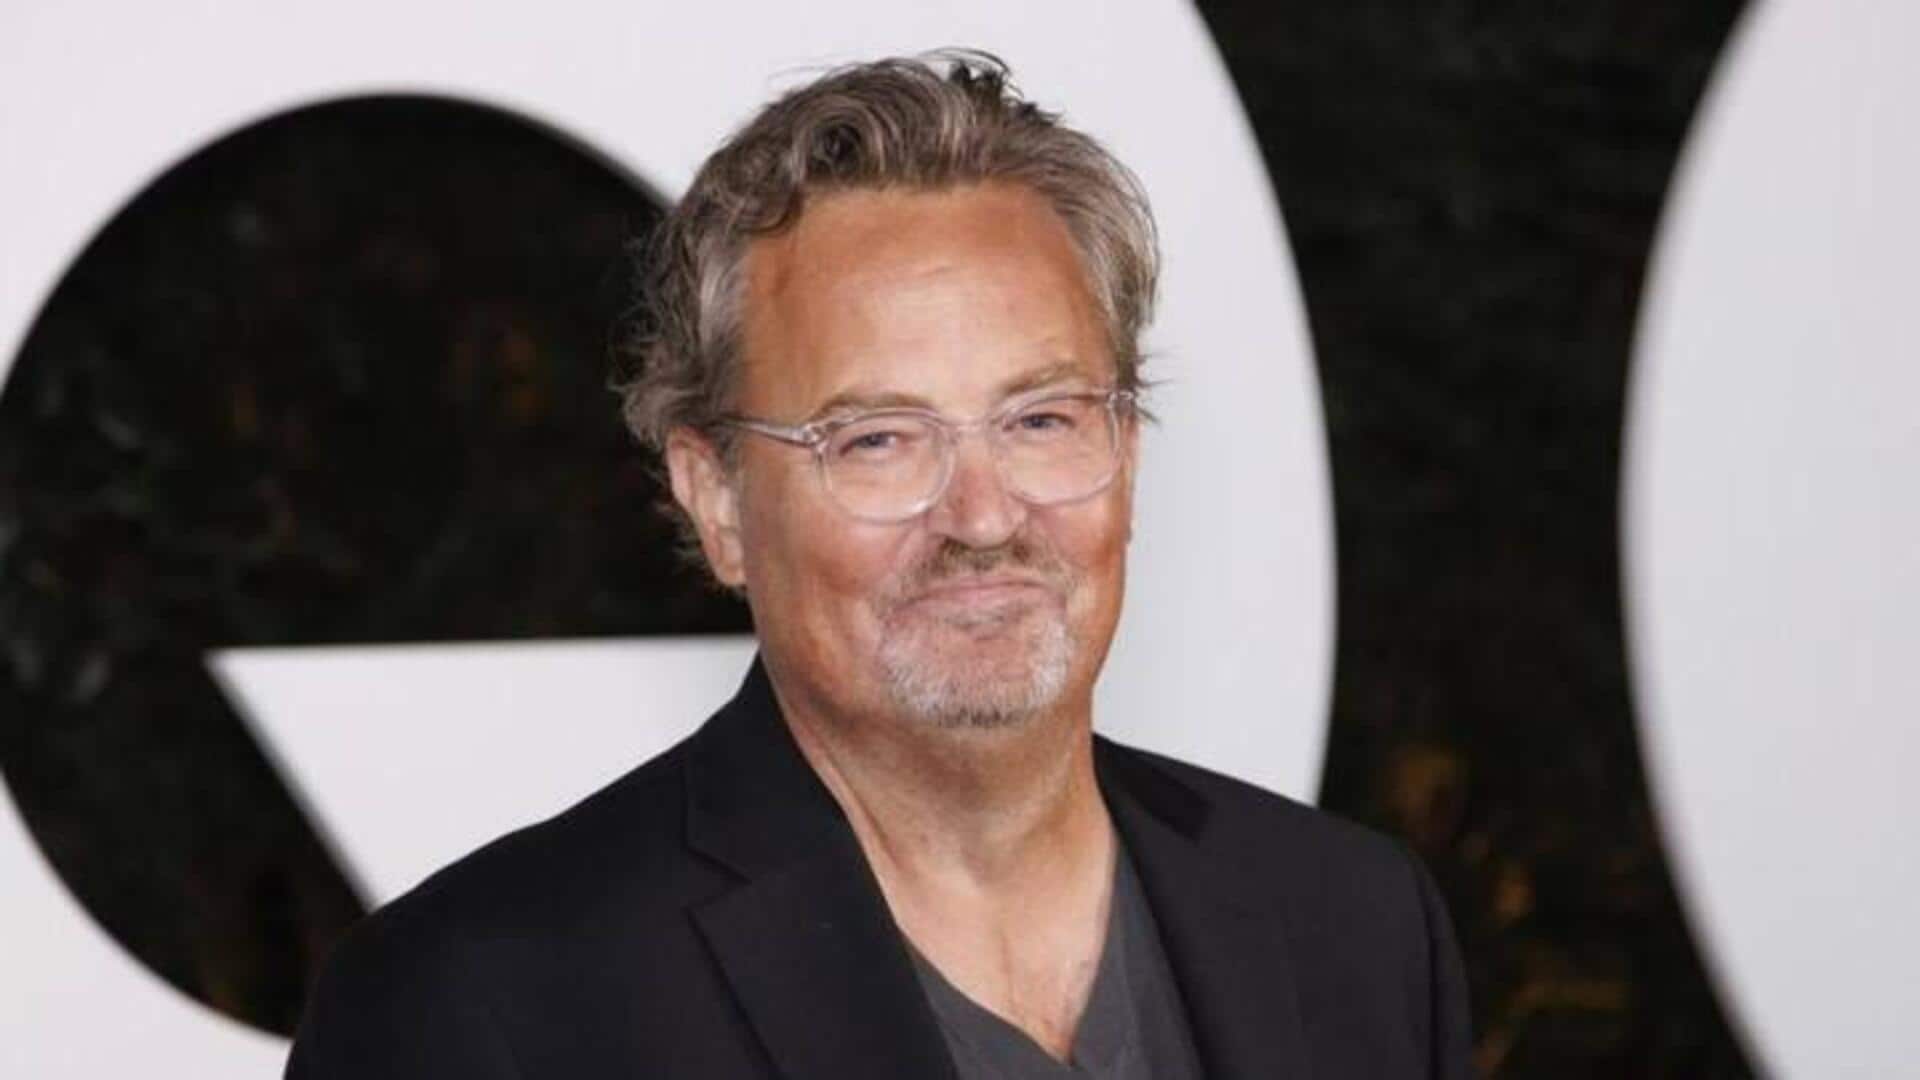 BAFTA responds to Matthew Perry's exclusion from 'In Memoriam' segment